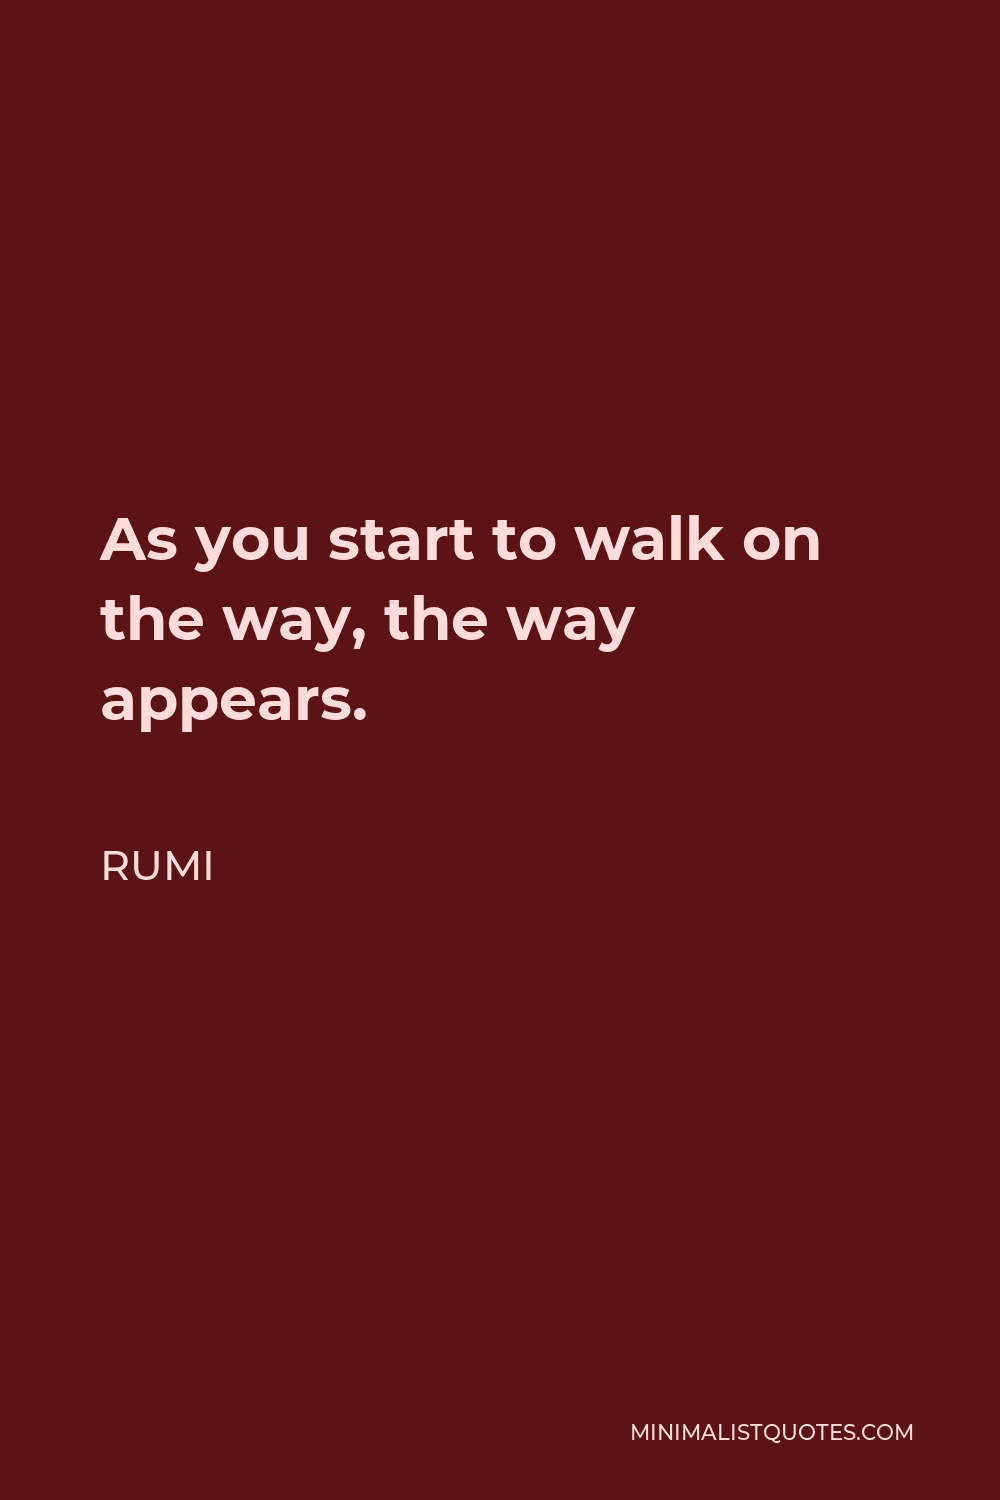 Rumi Quote - As you start to walk on the way, the way appears.